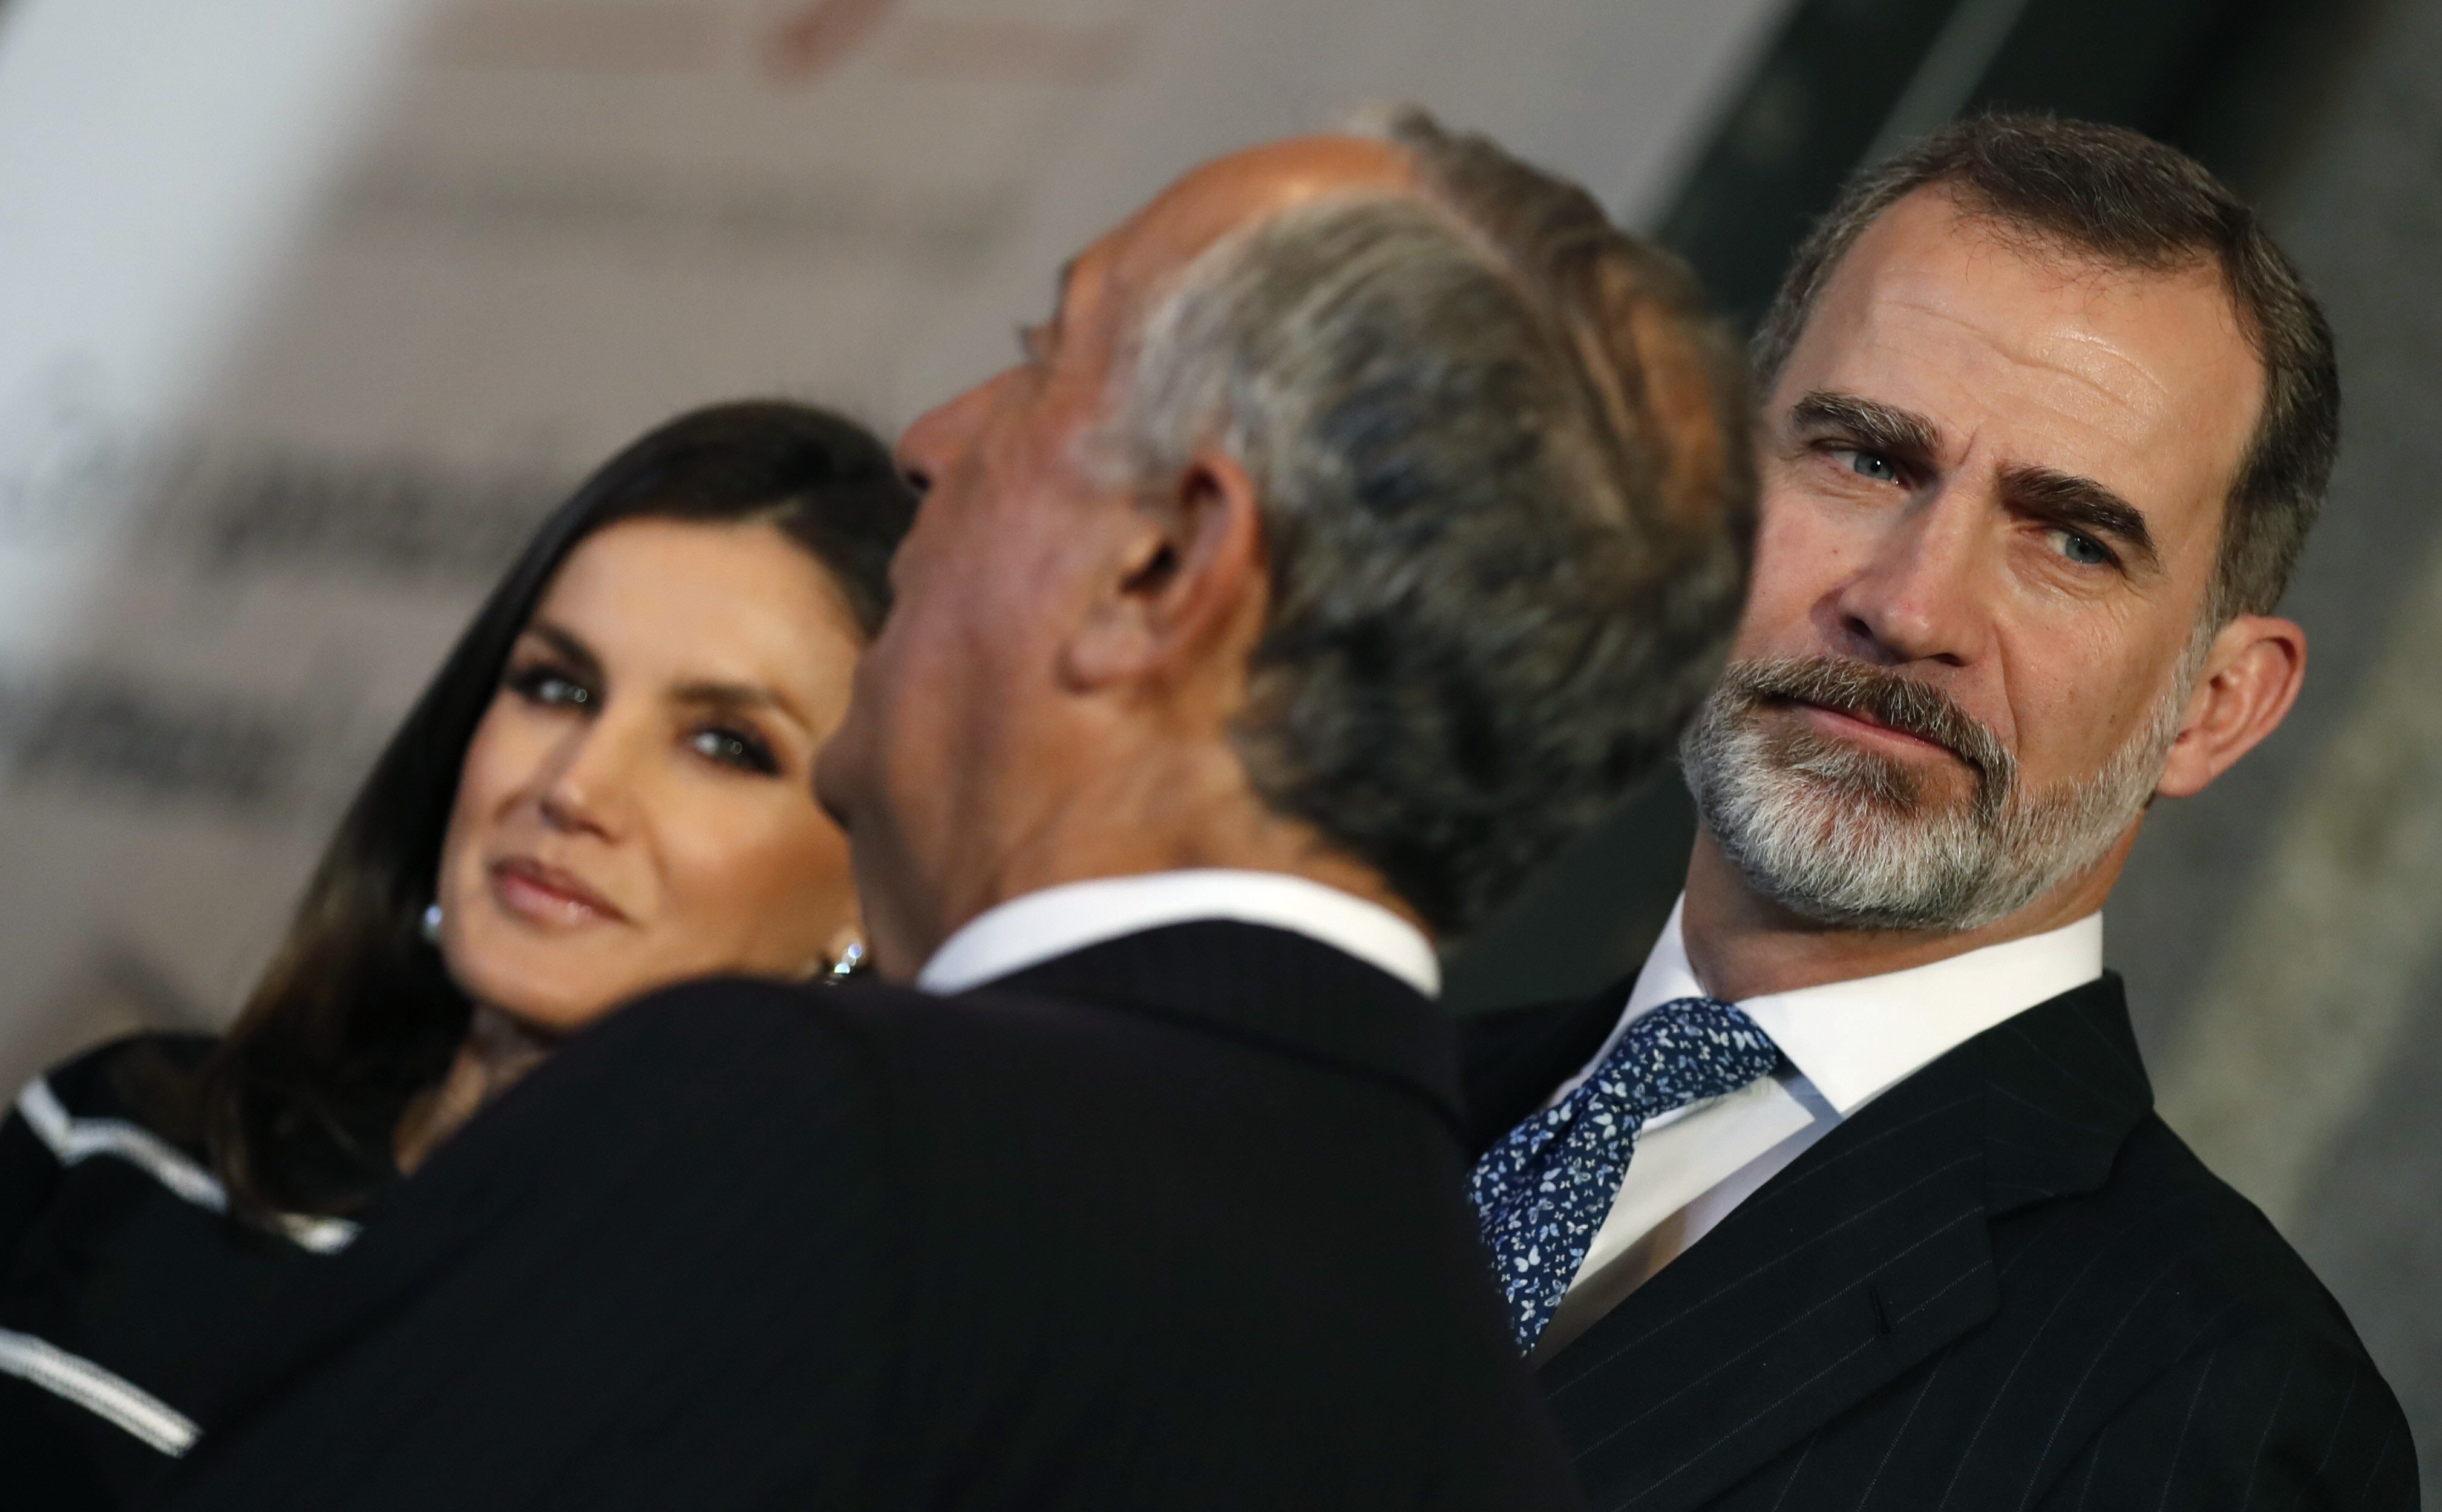 King Felipe VI: "Without respect for the law, democracy doesn't exist"